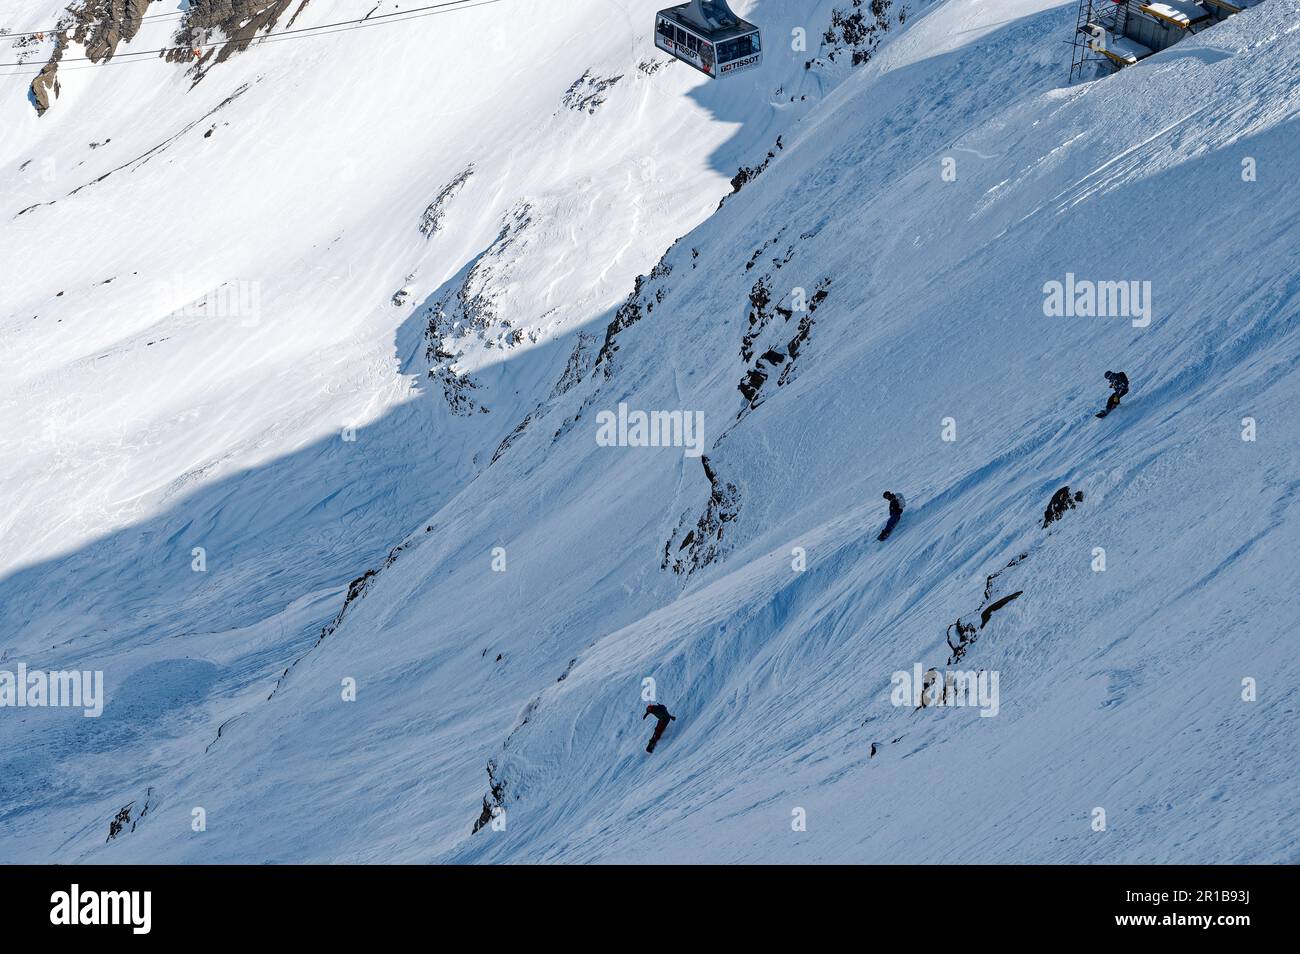 Three  Snowboarders start their descent while a cable car is reaching the peak in the swiss alps Stock Photo